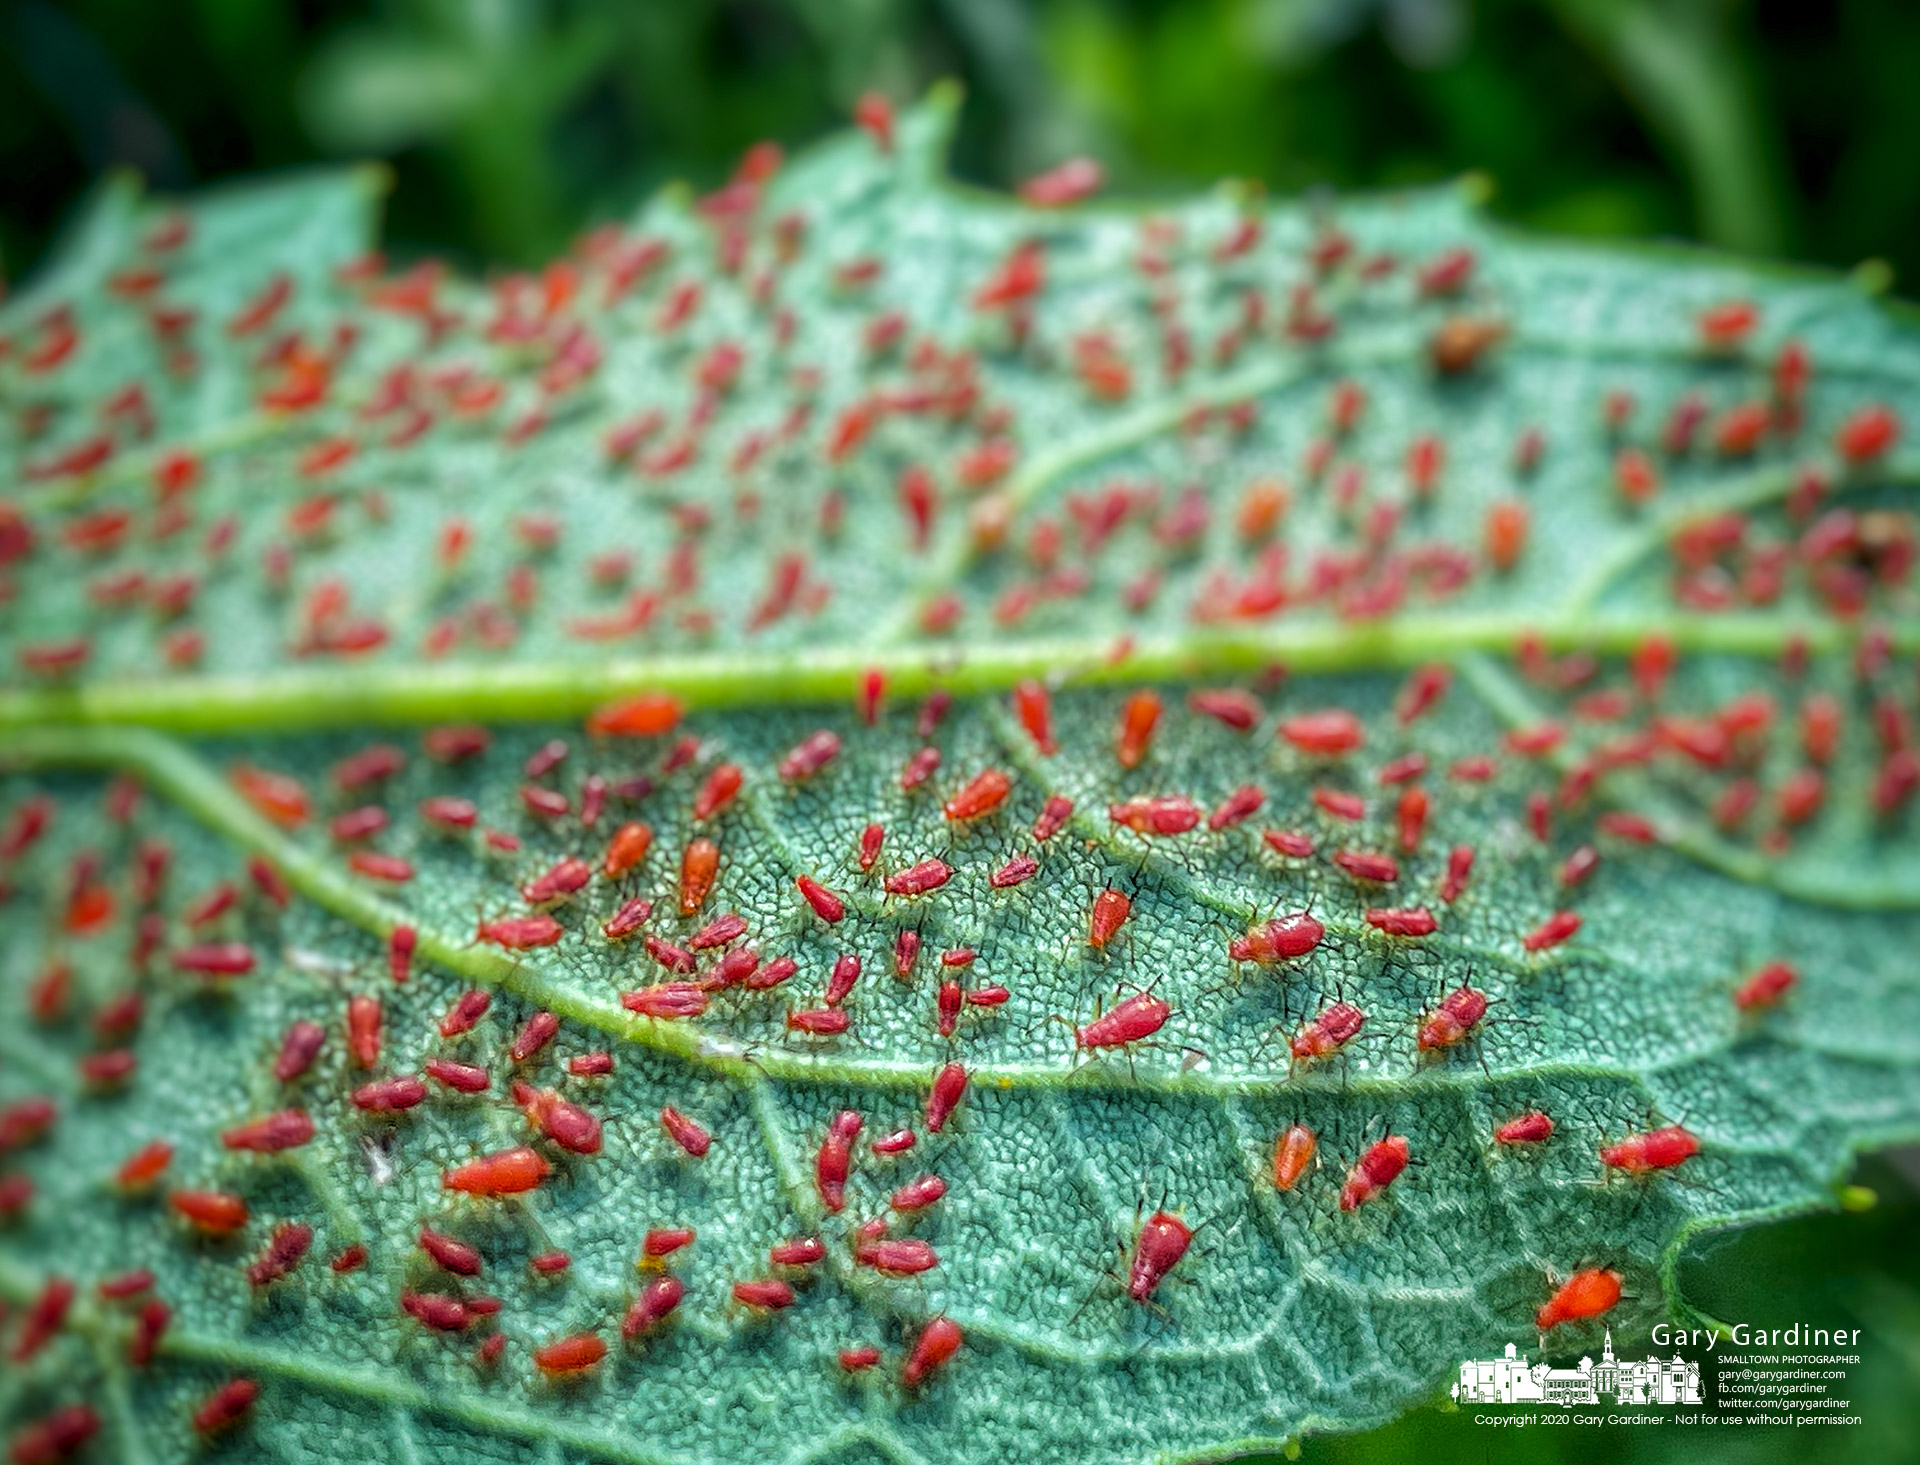 Red aphids cover the underside of leaves on prairie wildflower plans growing around the wetlands of Highlands Aquatic Center. My Final Photo for June 13, 2021.